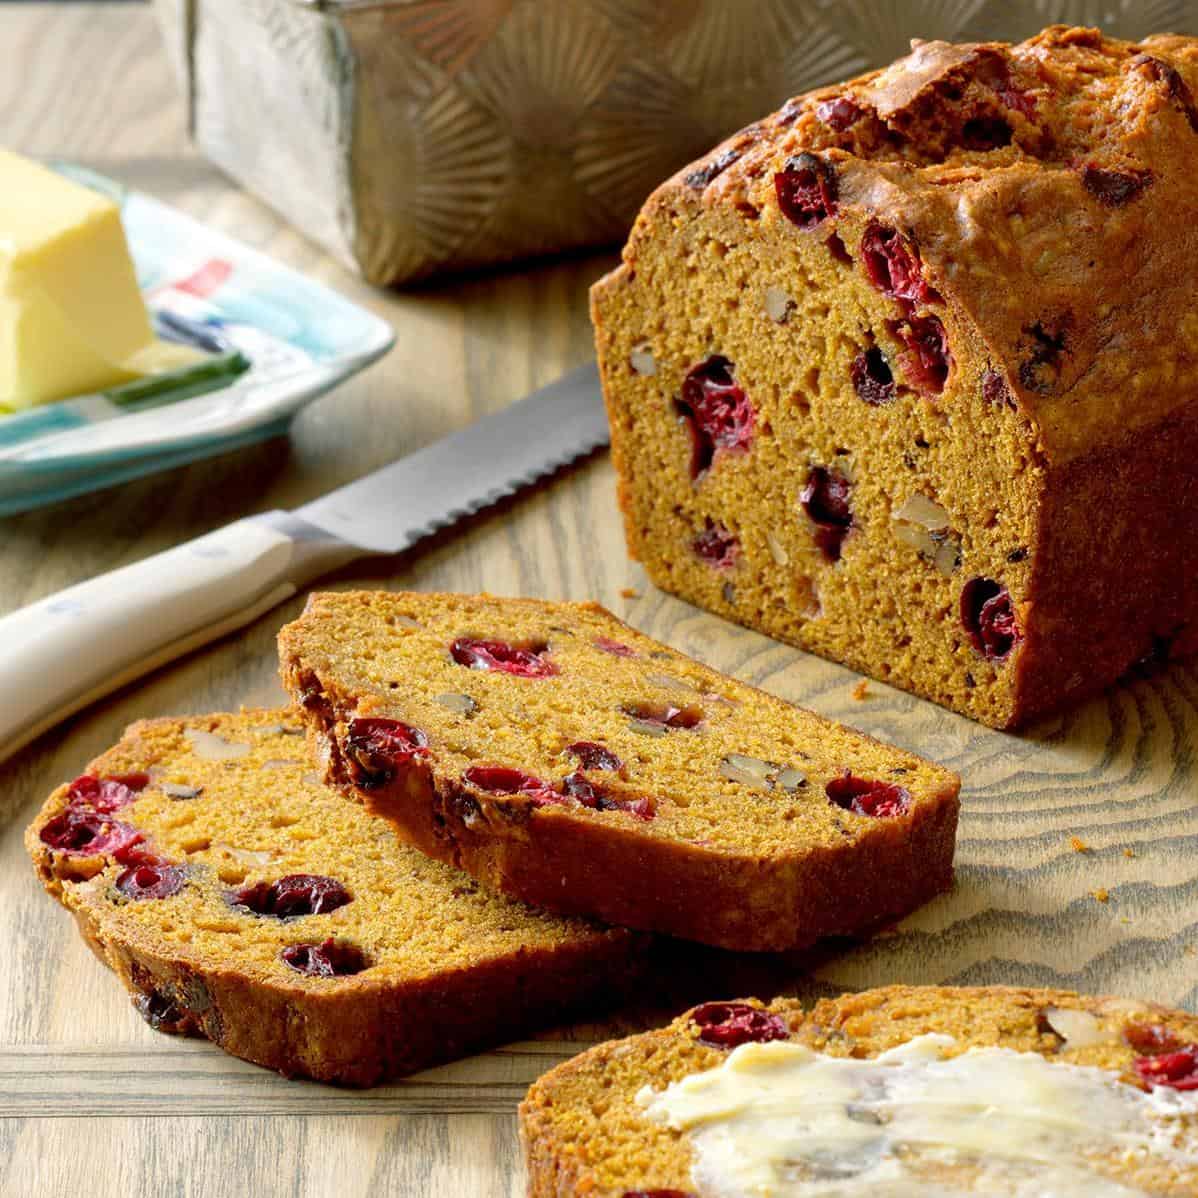  Whip up a batch of this fall-inspired quick bread to add some warmth to your kitchen.